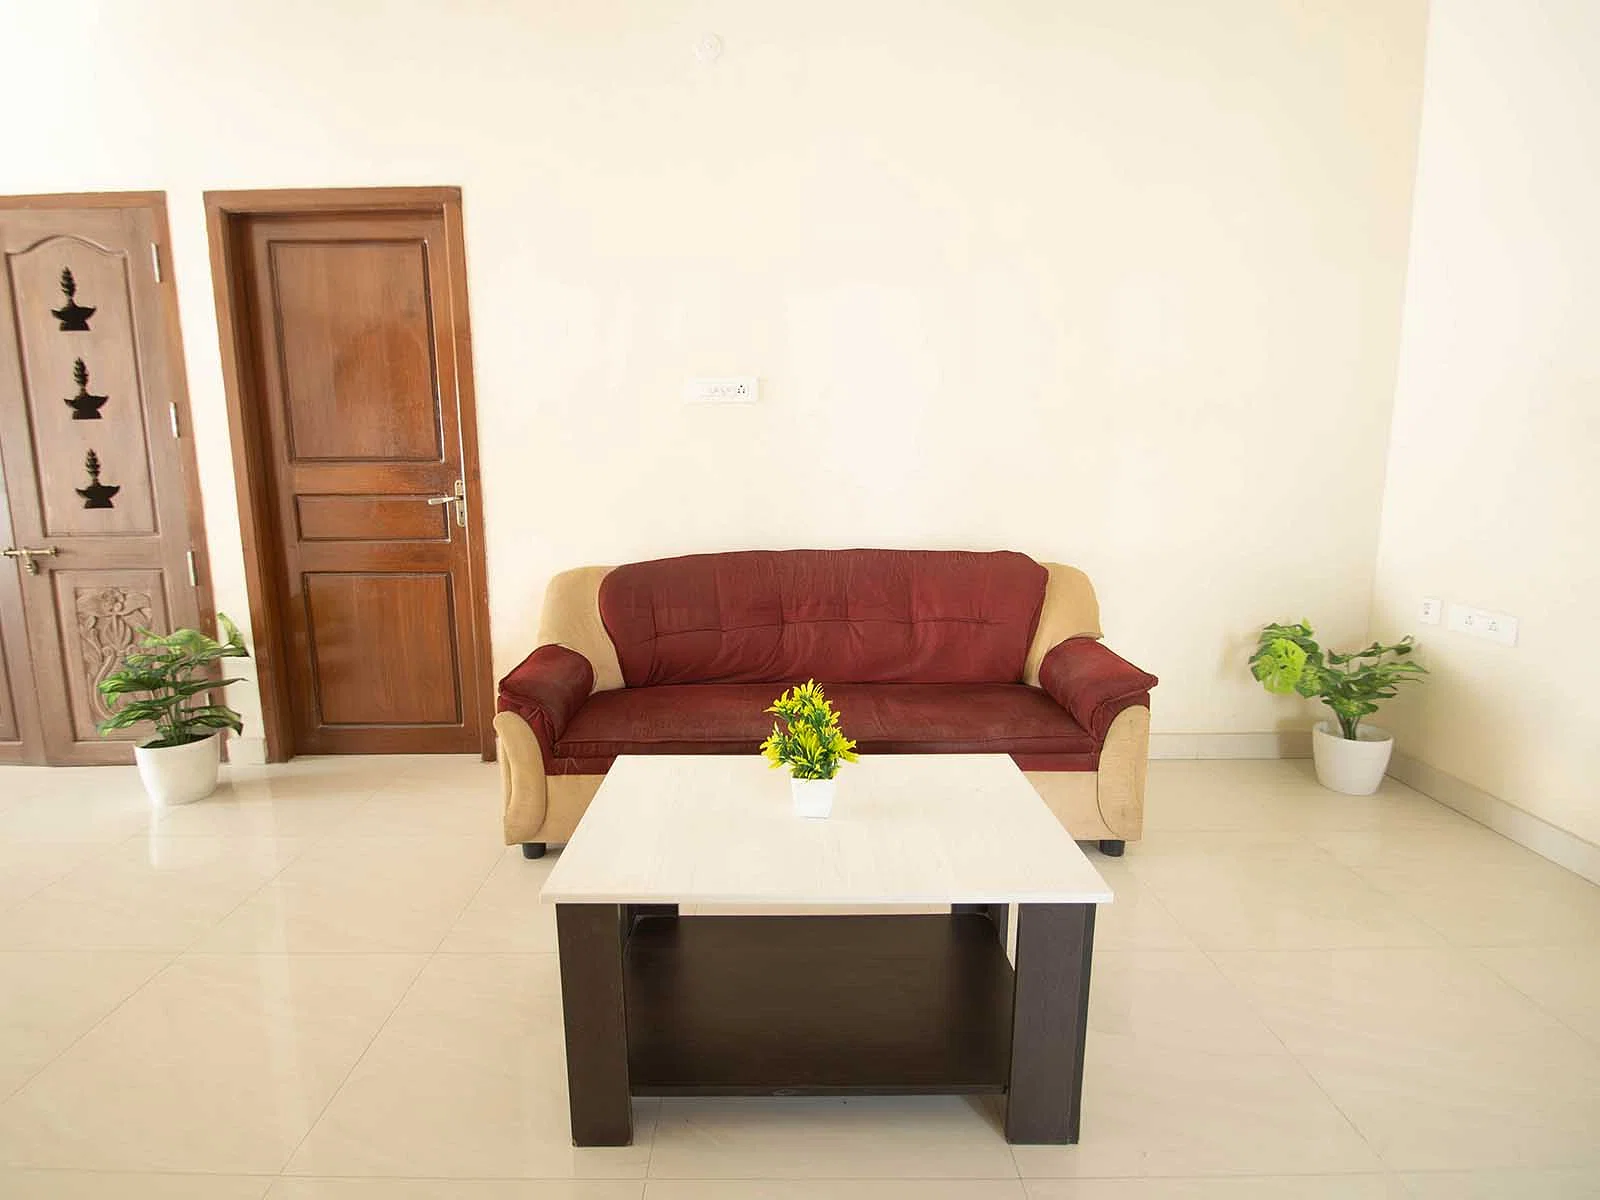 pgs in Velachery with Daily housekeeping facilities and free Wi-Fi-Zolo Belford